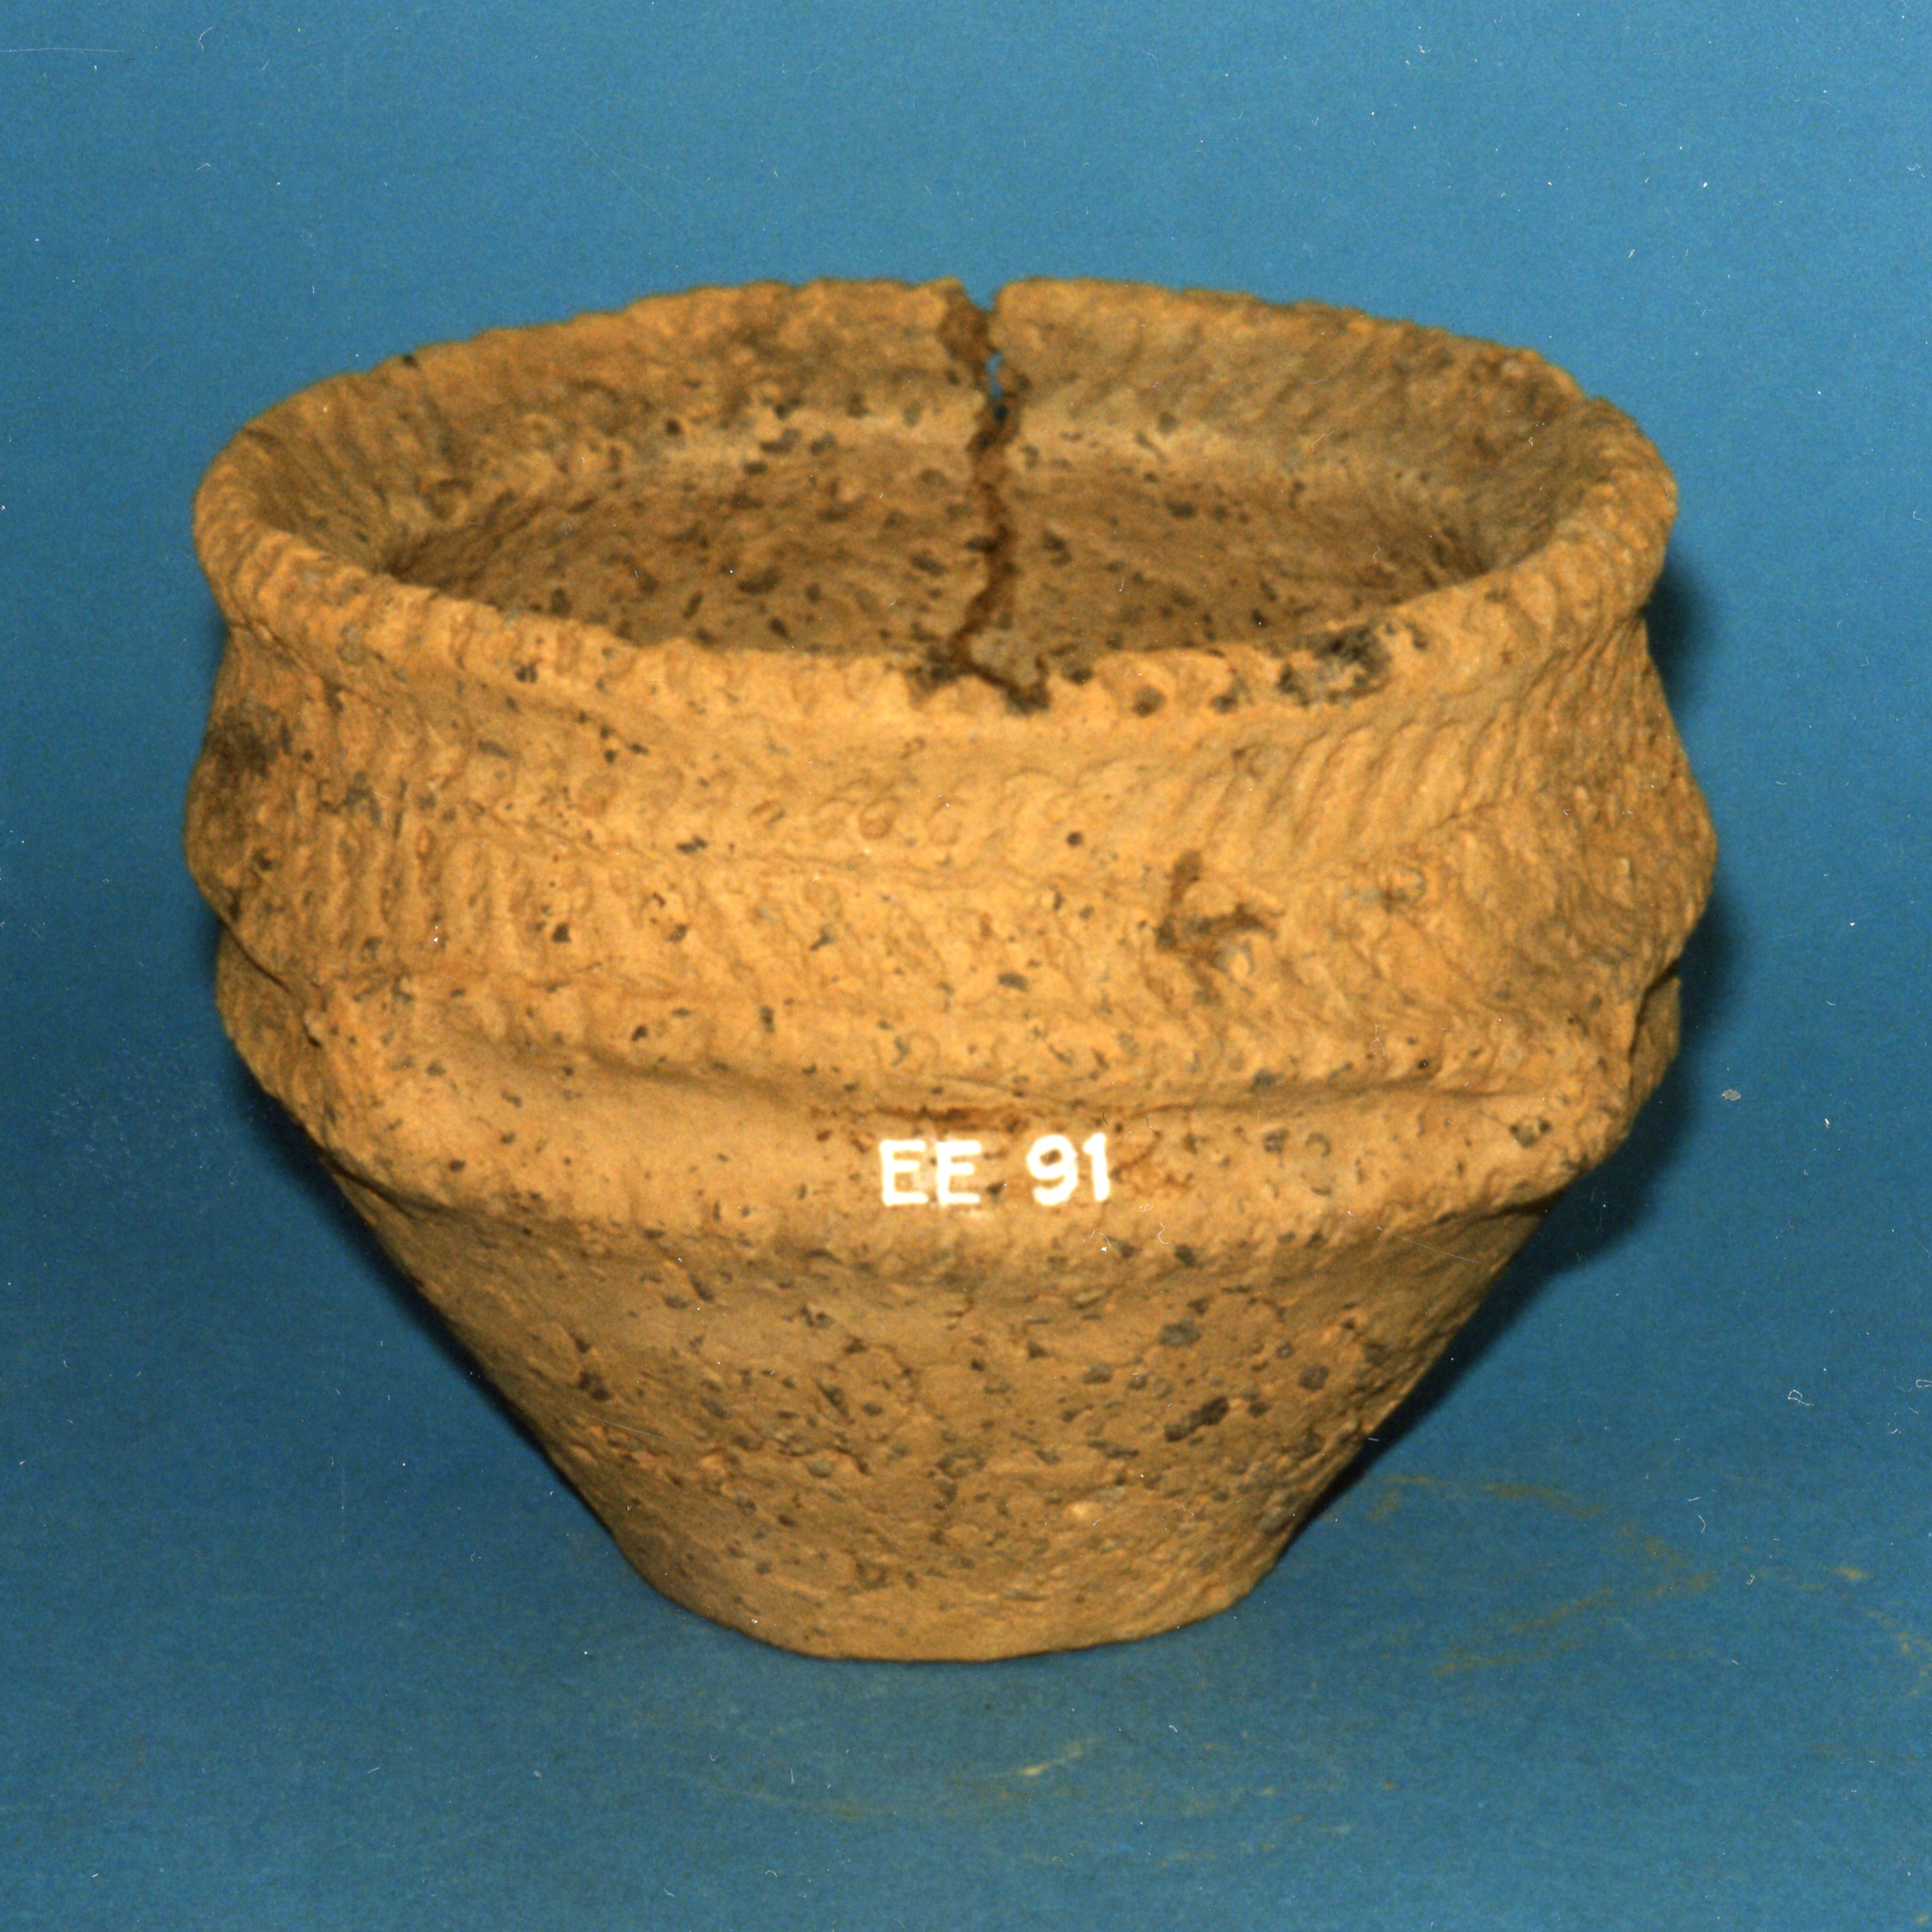 Image of Pottery food vessel from a cist on Battle Law, Naughton, Fife © National Museums Scotland